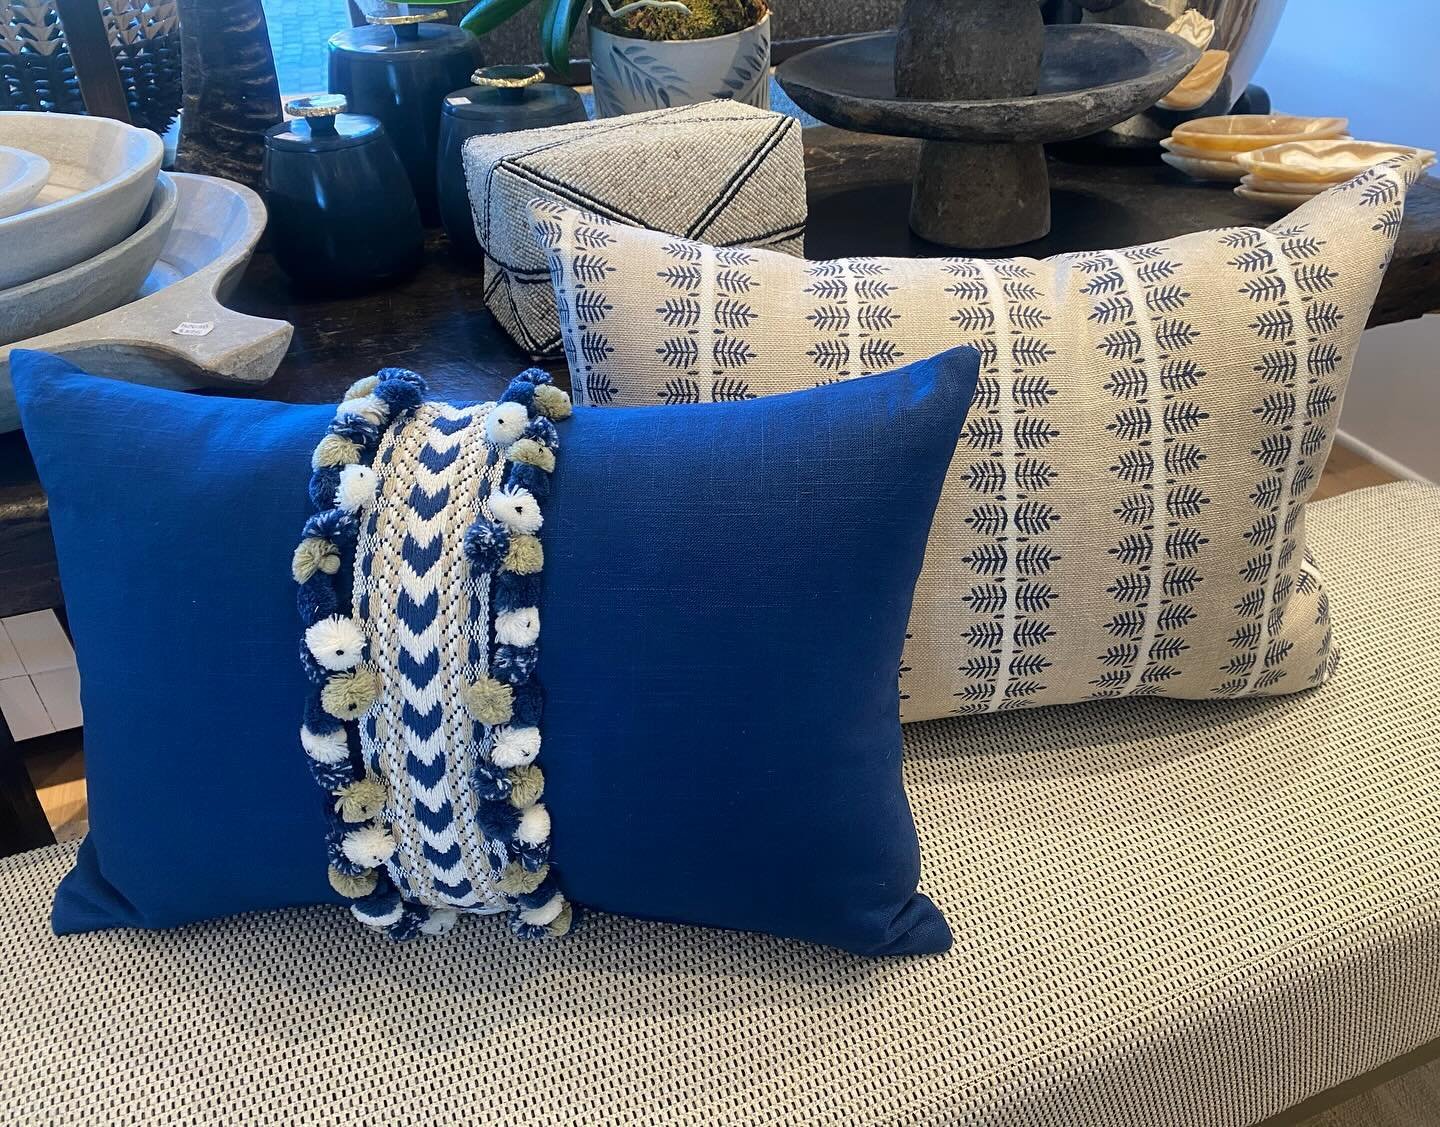 Custom pillows fresh out of the workroom 🤩 

Design Tip: When designing a room, select a neutral palette for the main pieces then add pops of color and personality with pillows and decor!
.
.
.
#custom #custompillows #designer #interiordecor #interi